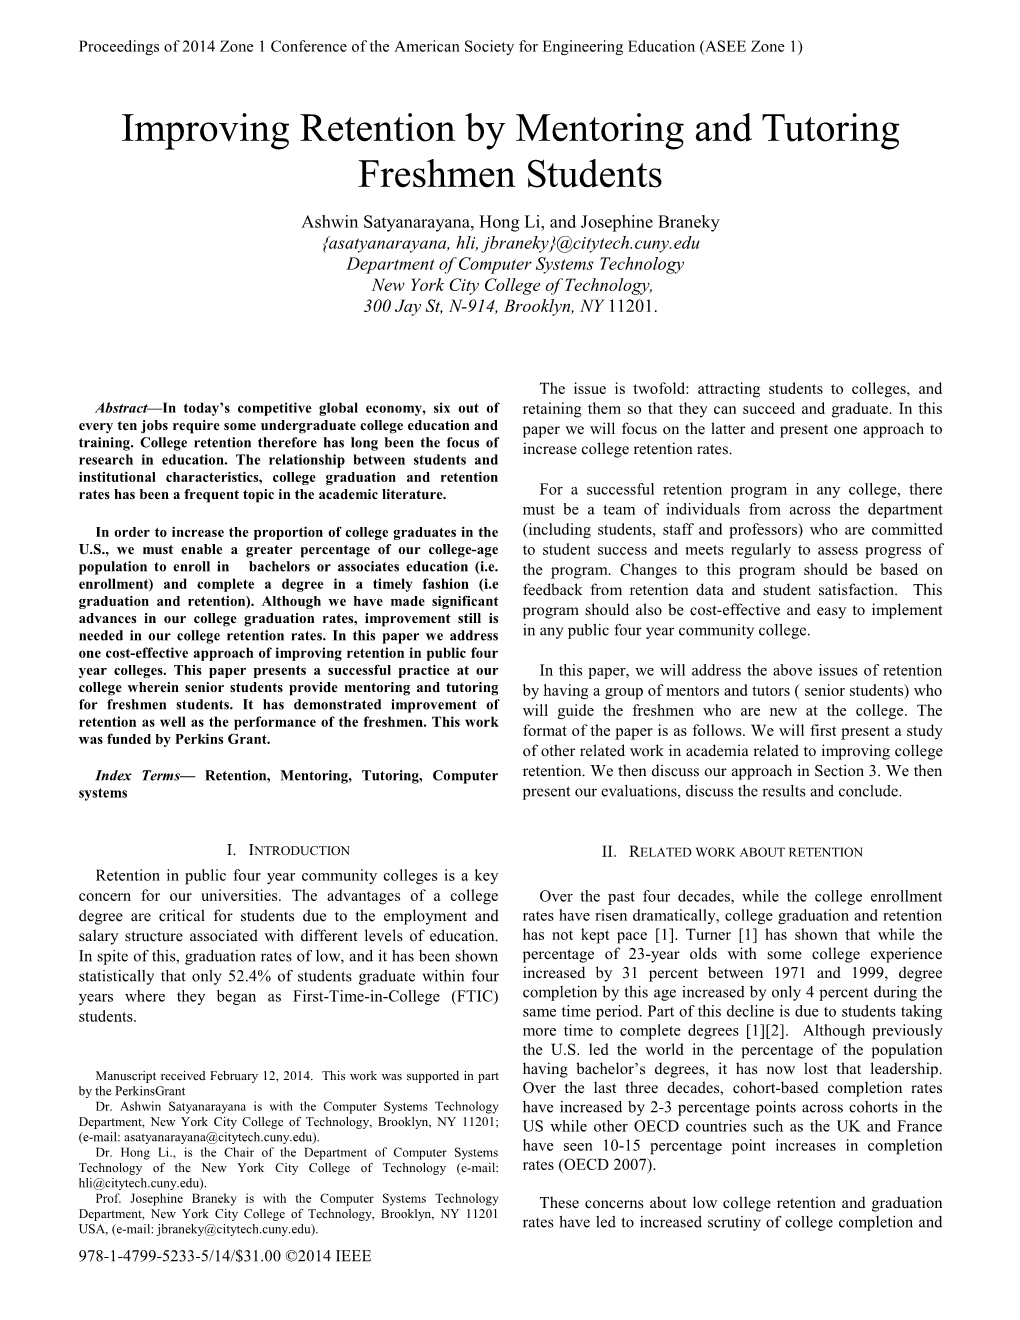 Improving Retention by Mentoring and Tutoring Freshmen Students